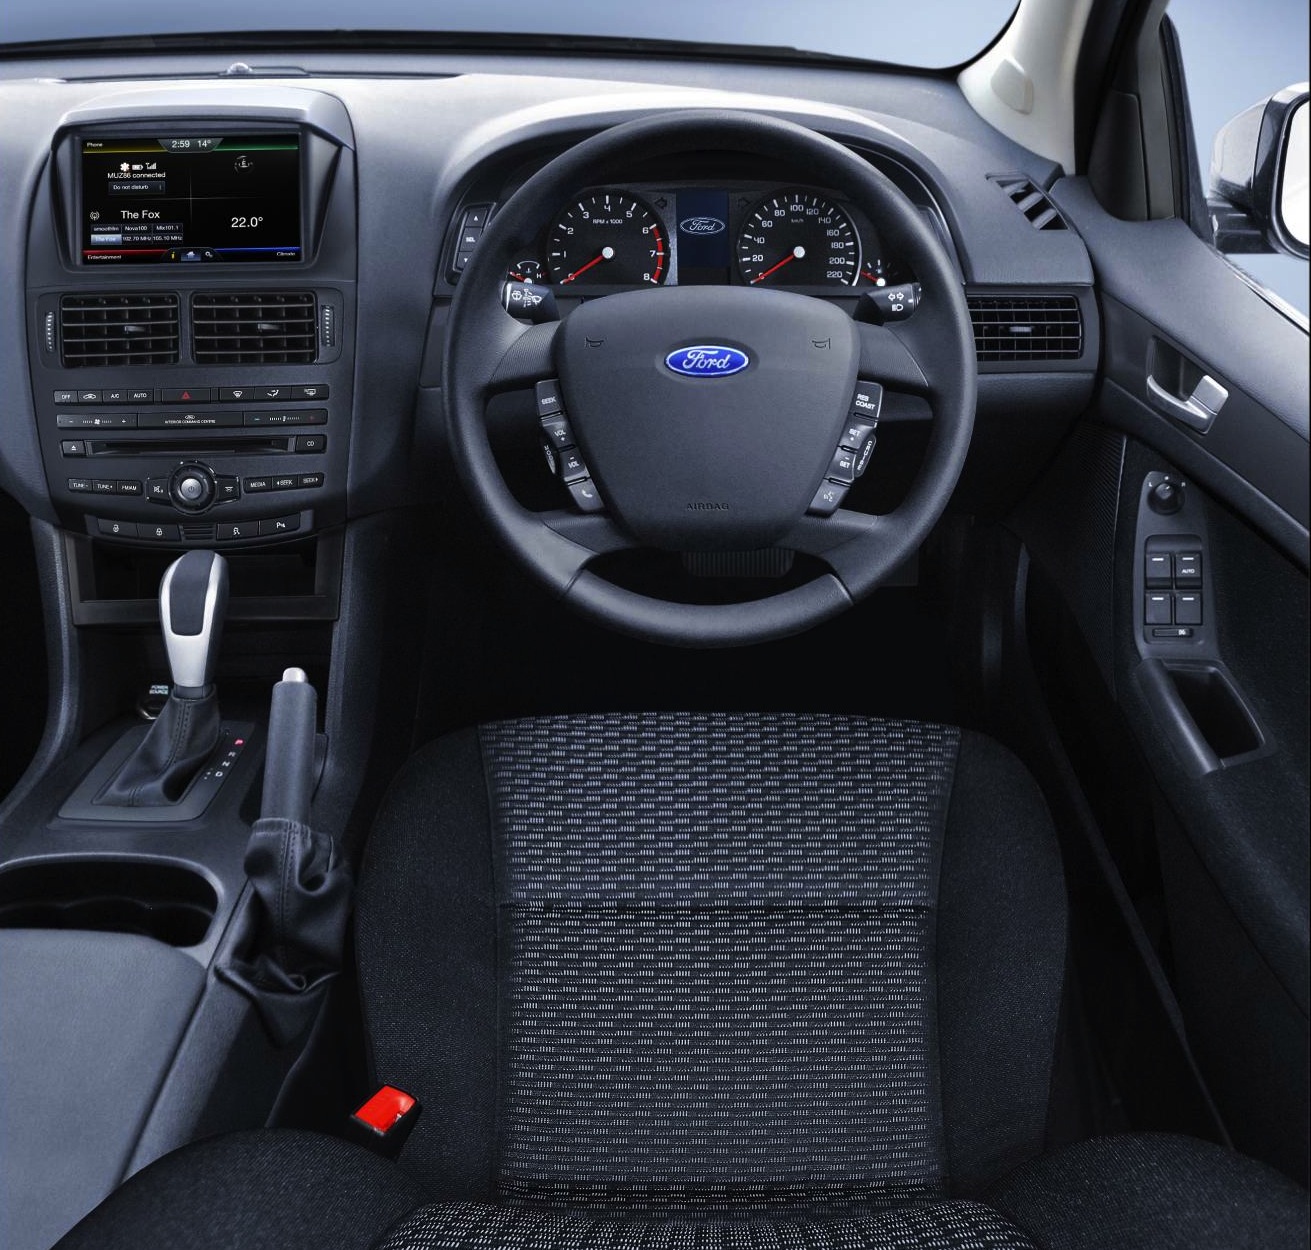 2015 Ford Falcon Fuel Economy Improved 9 Interior Revealed